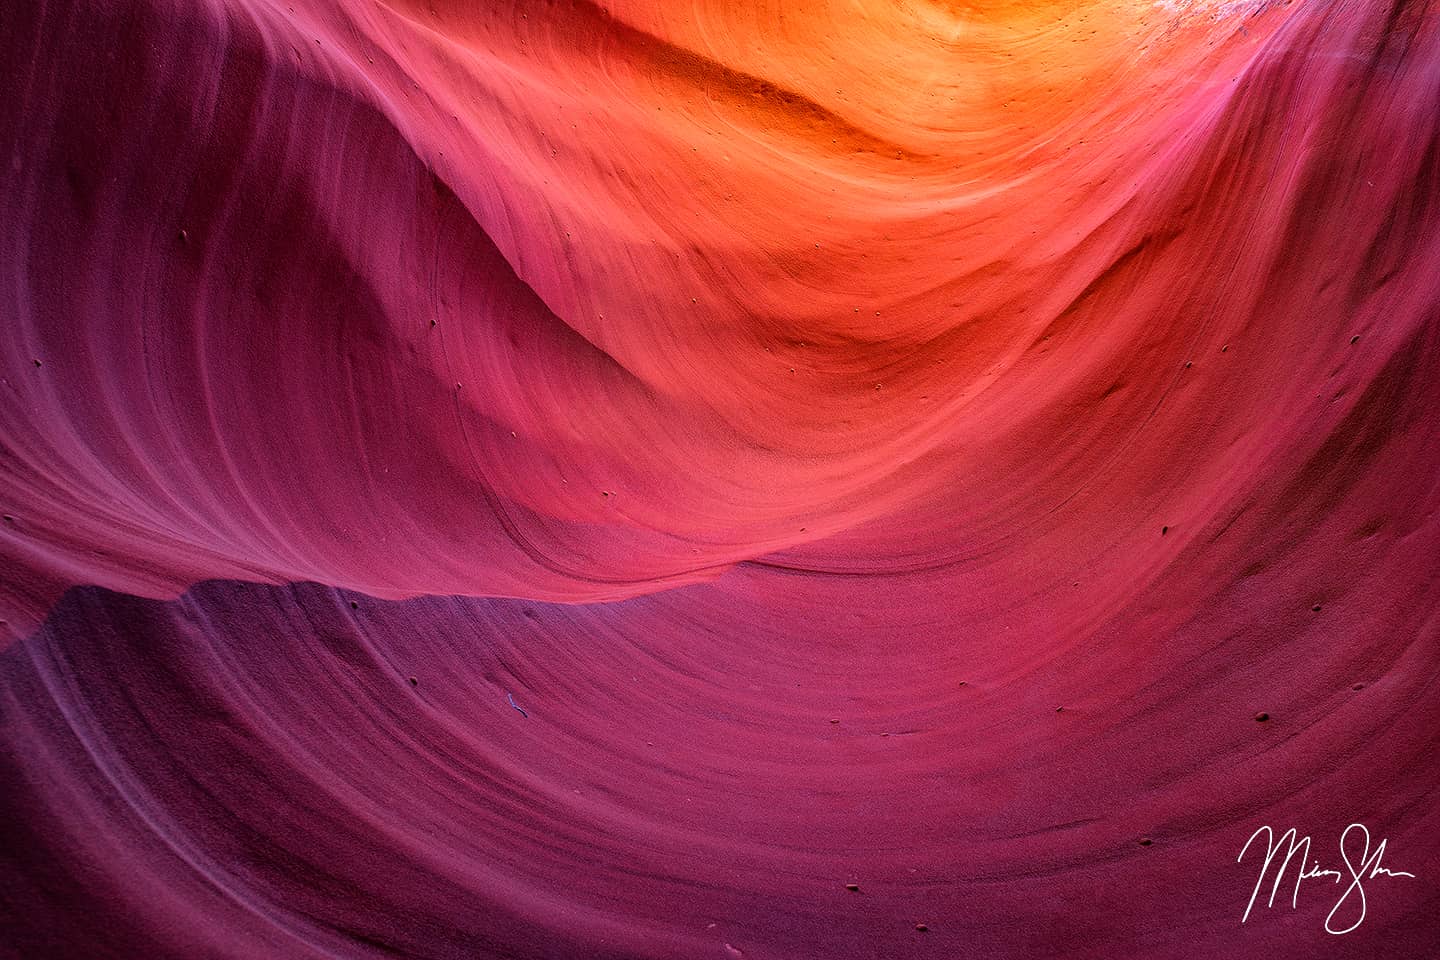 Beautiful colors on the sandstone walls of a classic slot canyon